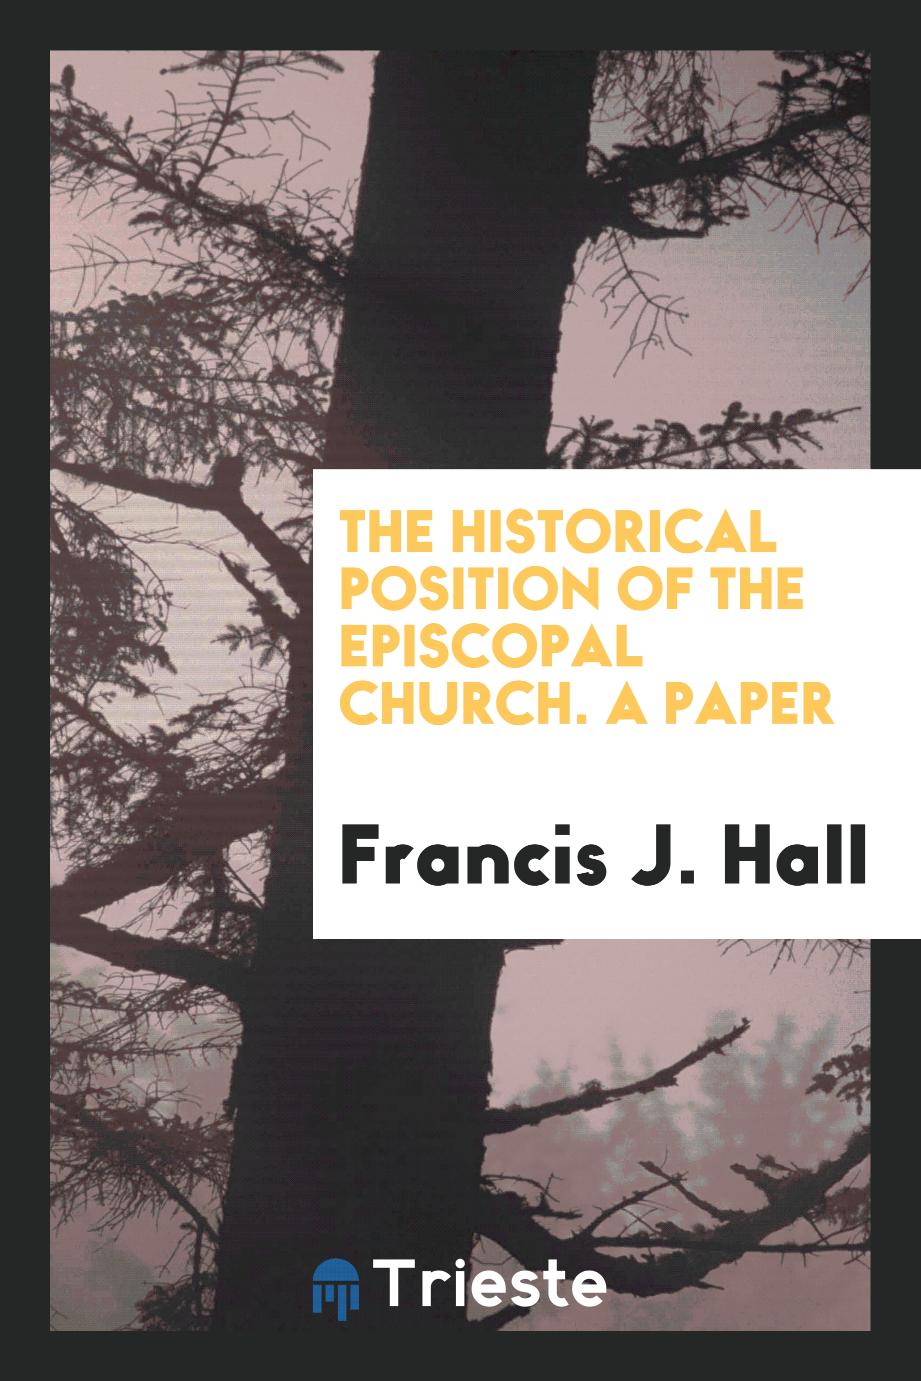 The Historical Position of the Episcopal Church. A paper